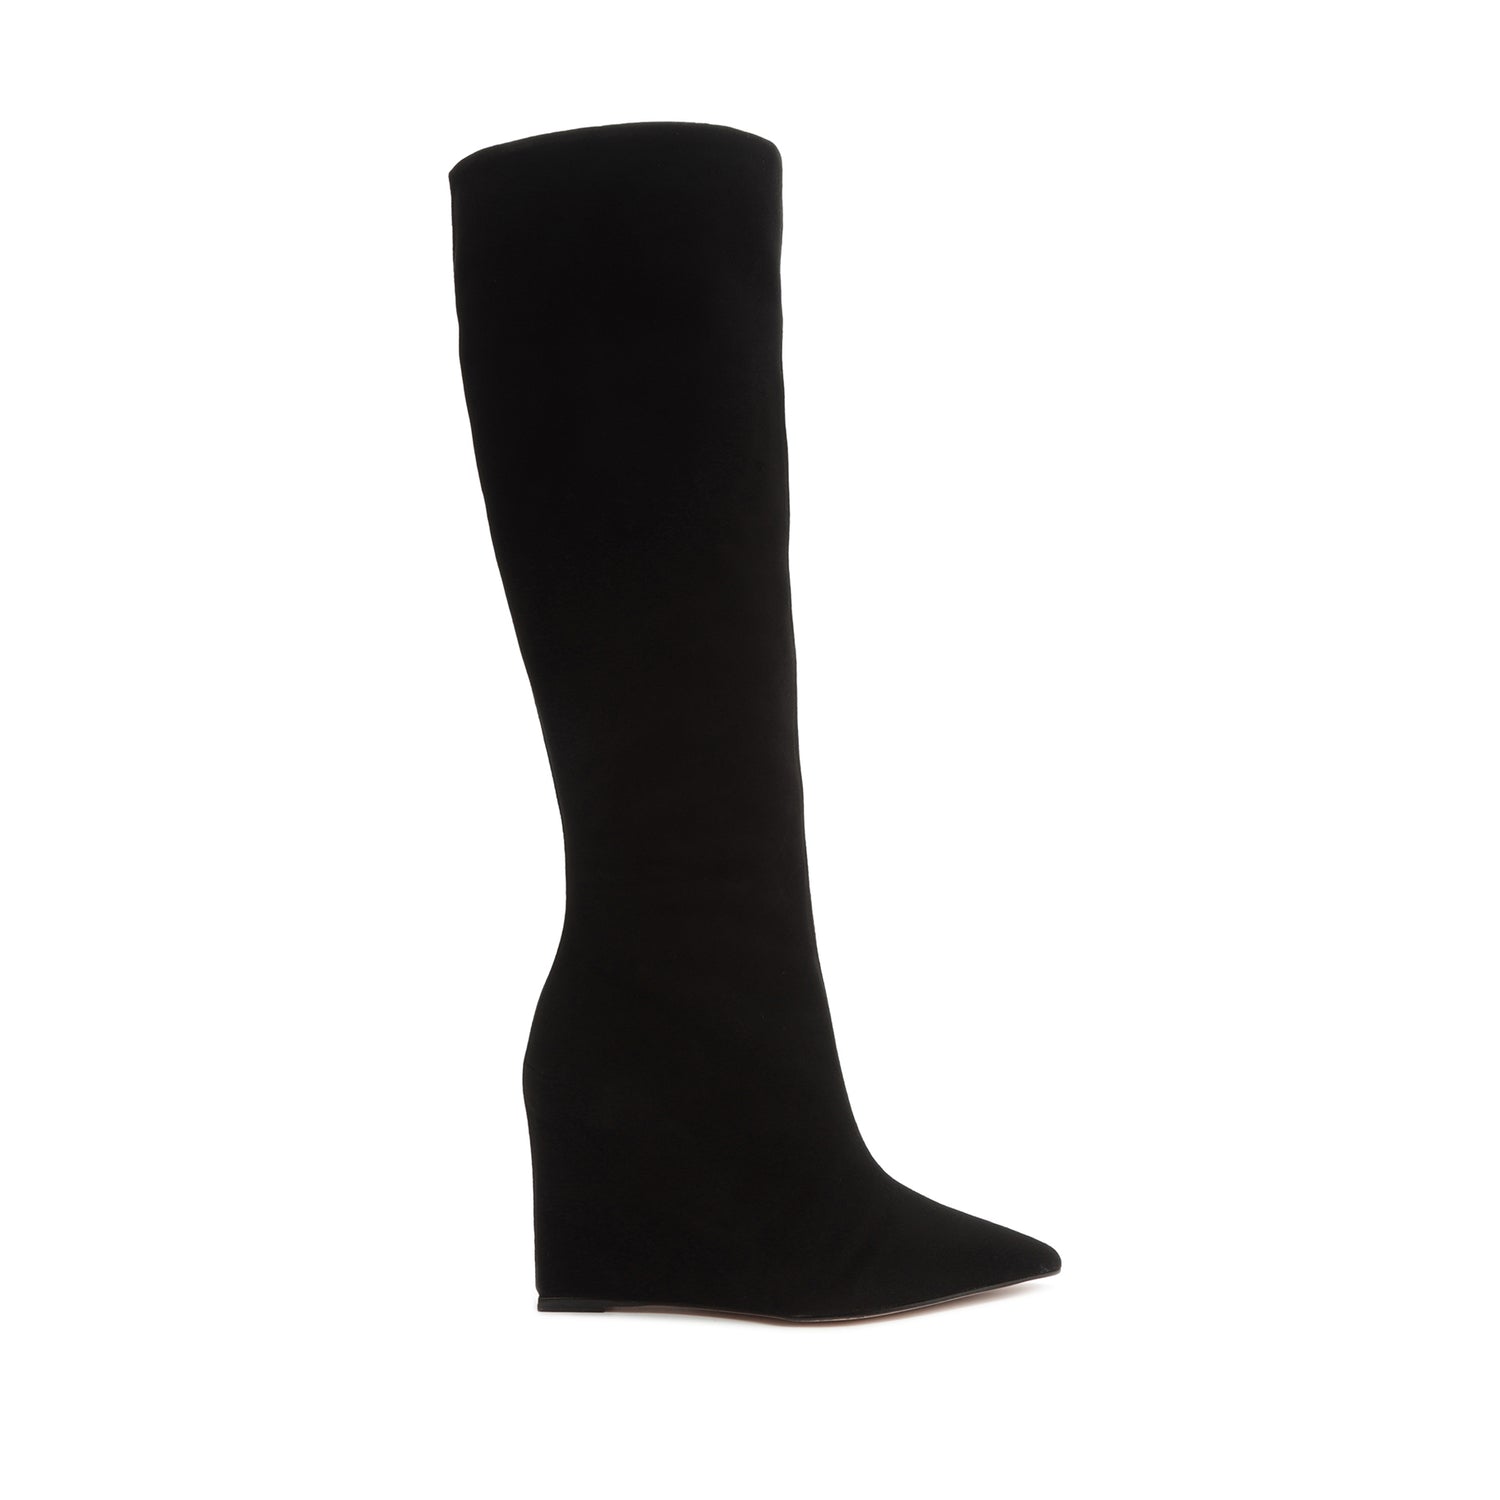 Asya Up Suede Boot Boots Fall 23 5 Black Suede - Schutz Shoes